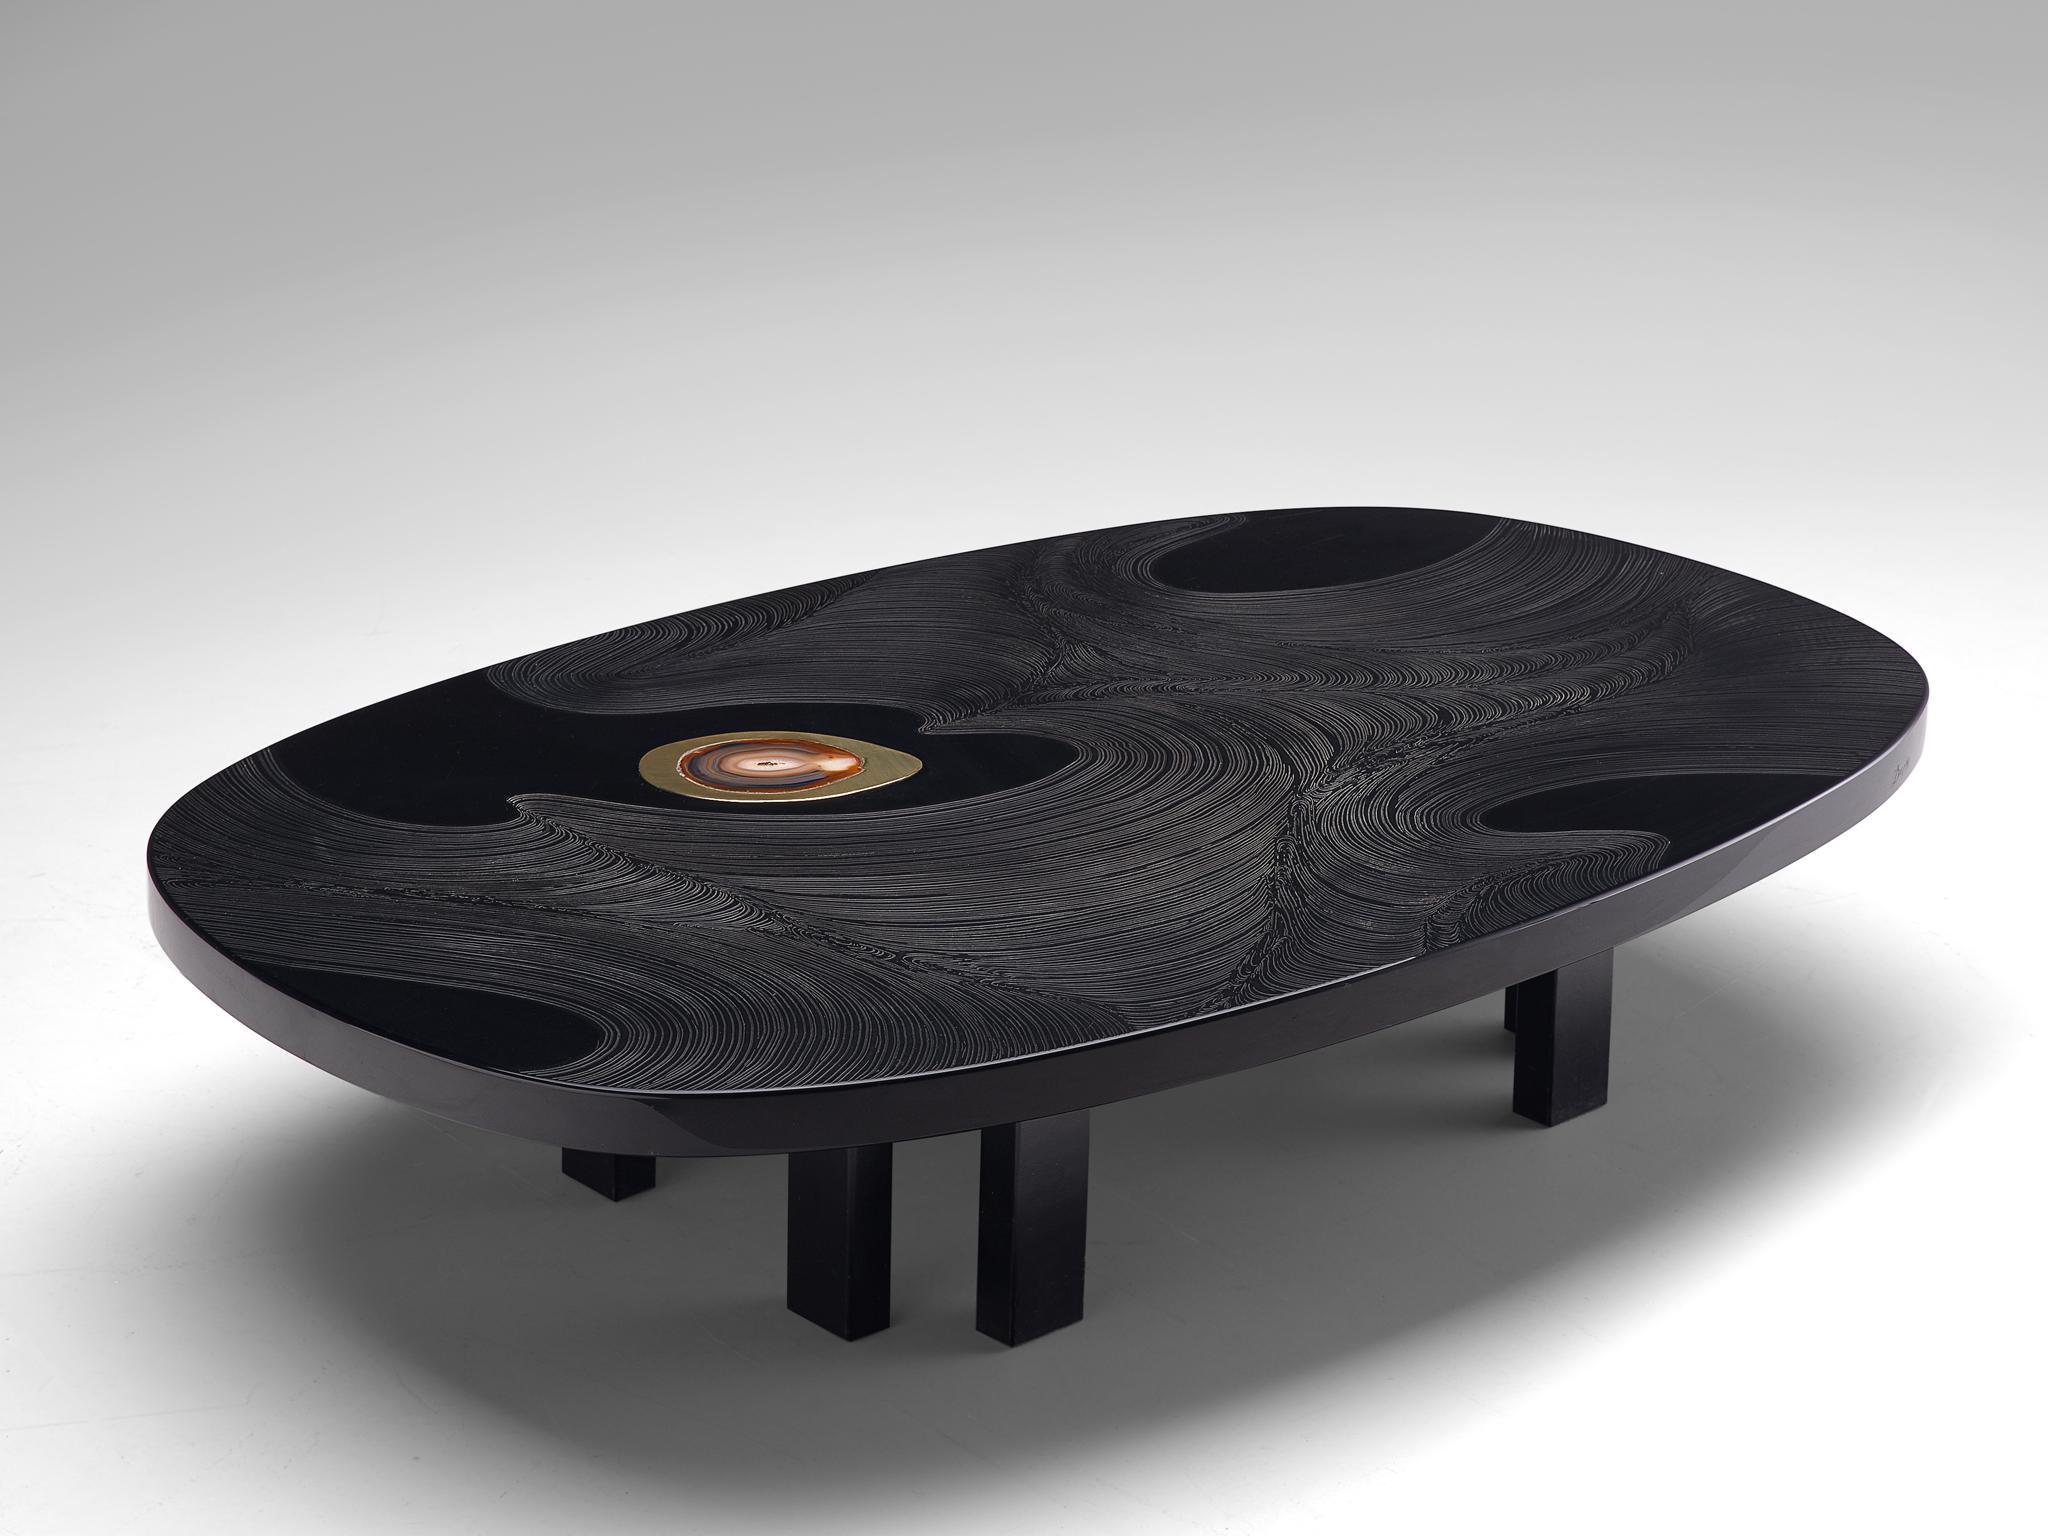 Belgian Jean Claude Dresse Luxurious Coffee Table in Black Resin Inlaid with Agate